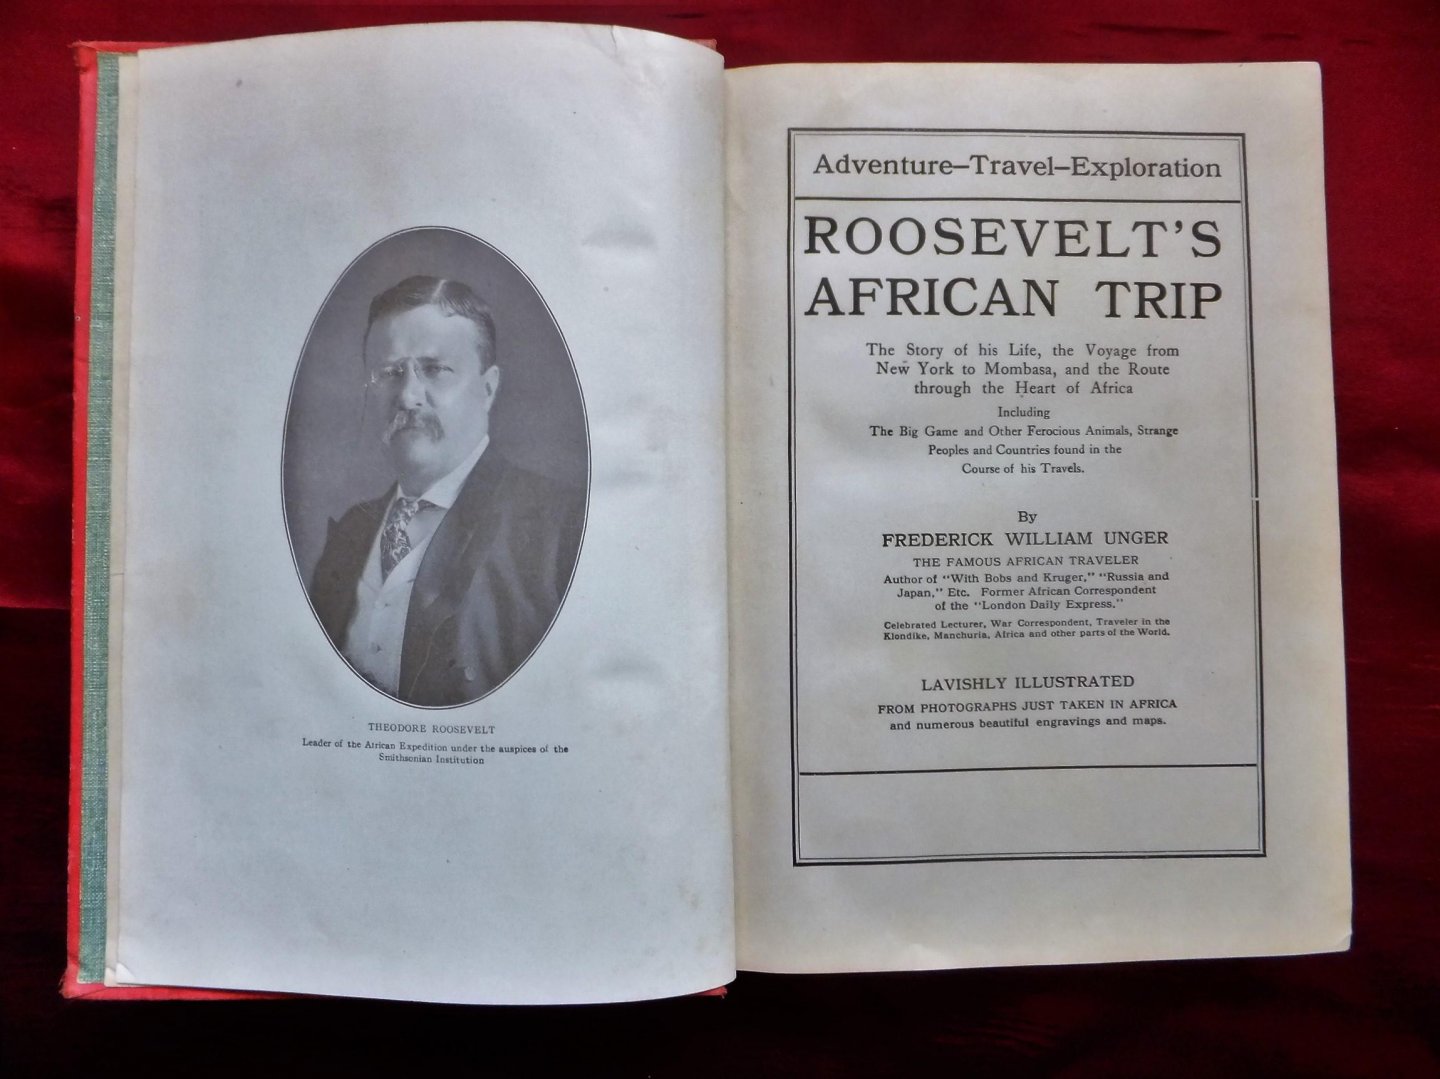 Unger, Frederick William - Roosevelt's African Trip; The Story of His Life, the Voyage from New York to Mombasa, and the Route Through the Heart of Africa Including Big Game and Other Ferocious Animals, Strange Peoples and Countries Found in the Course of His Travels